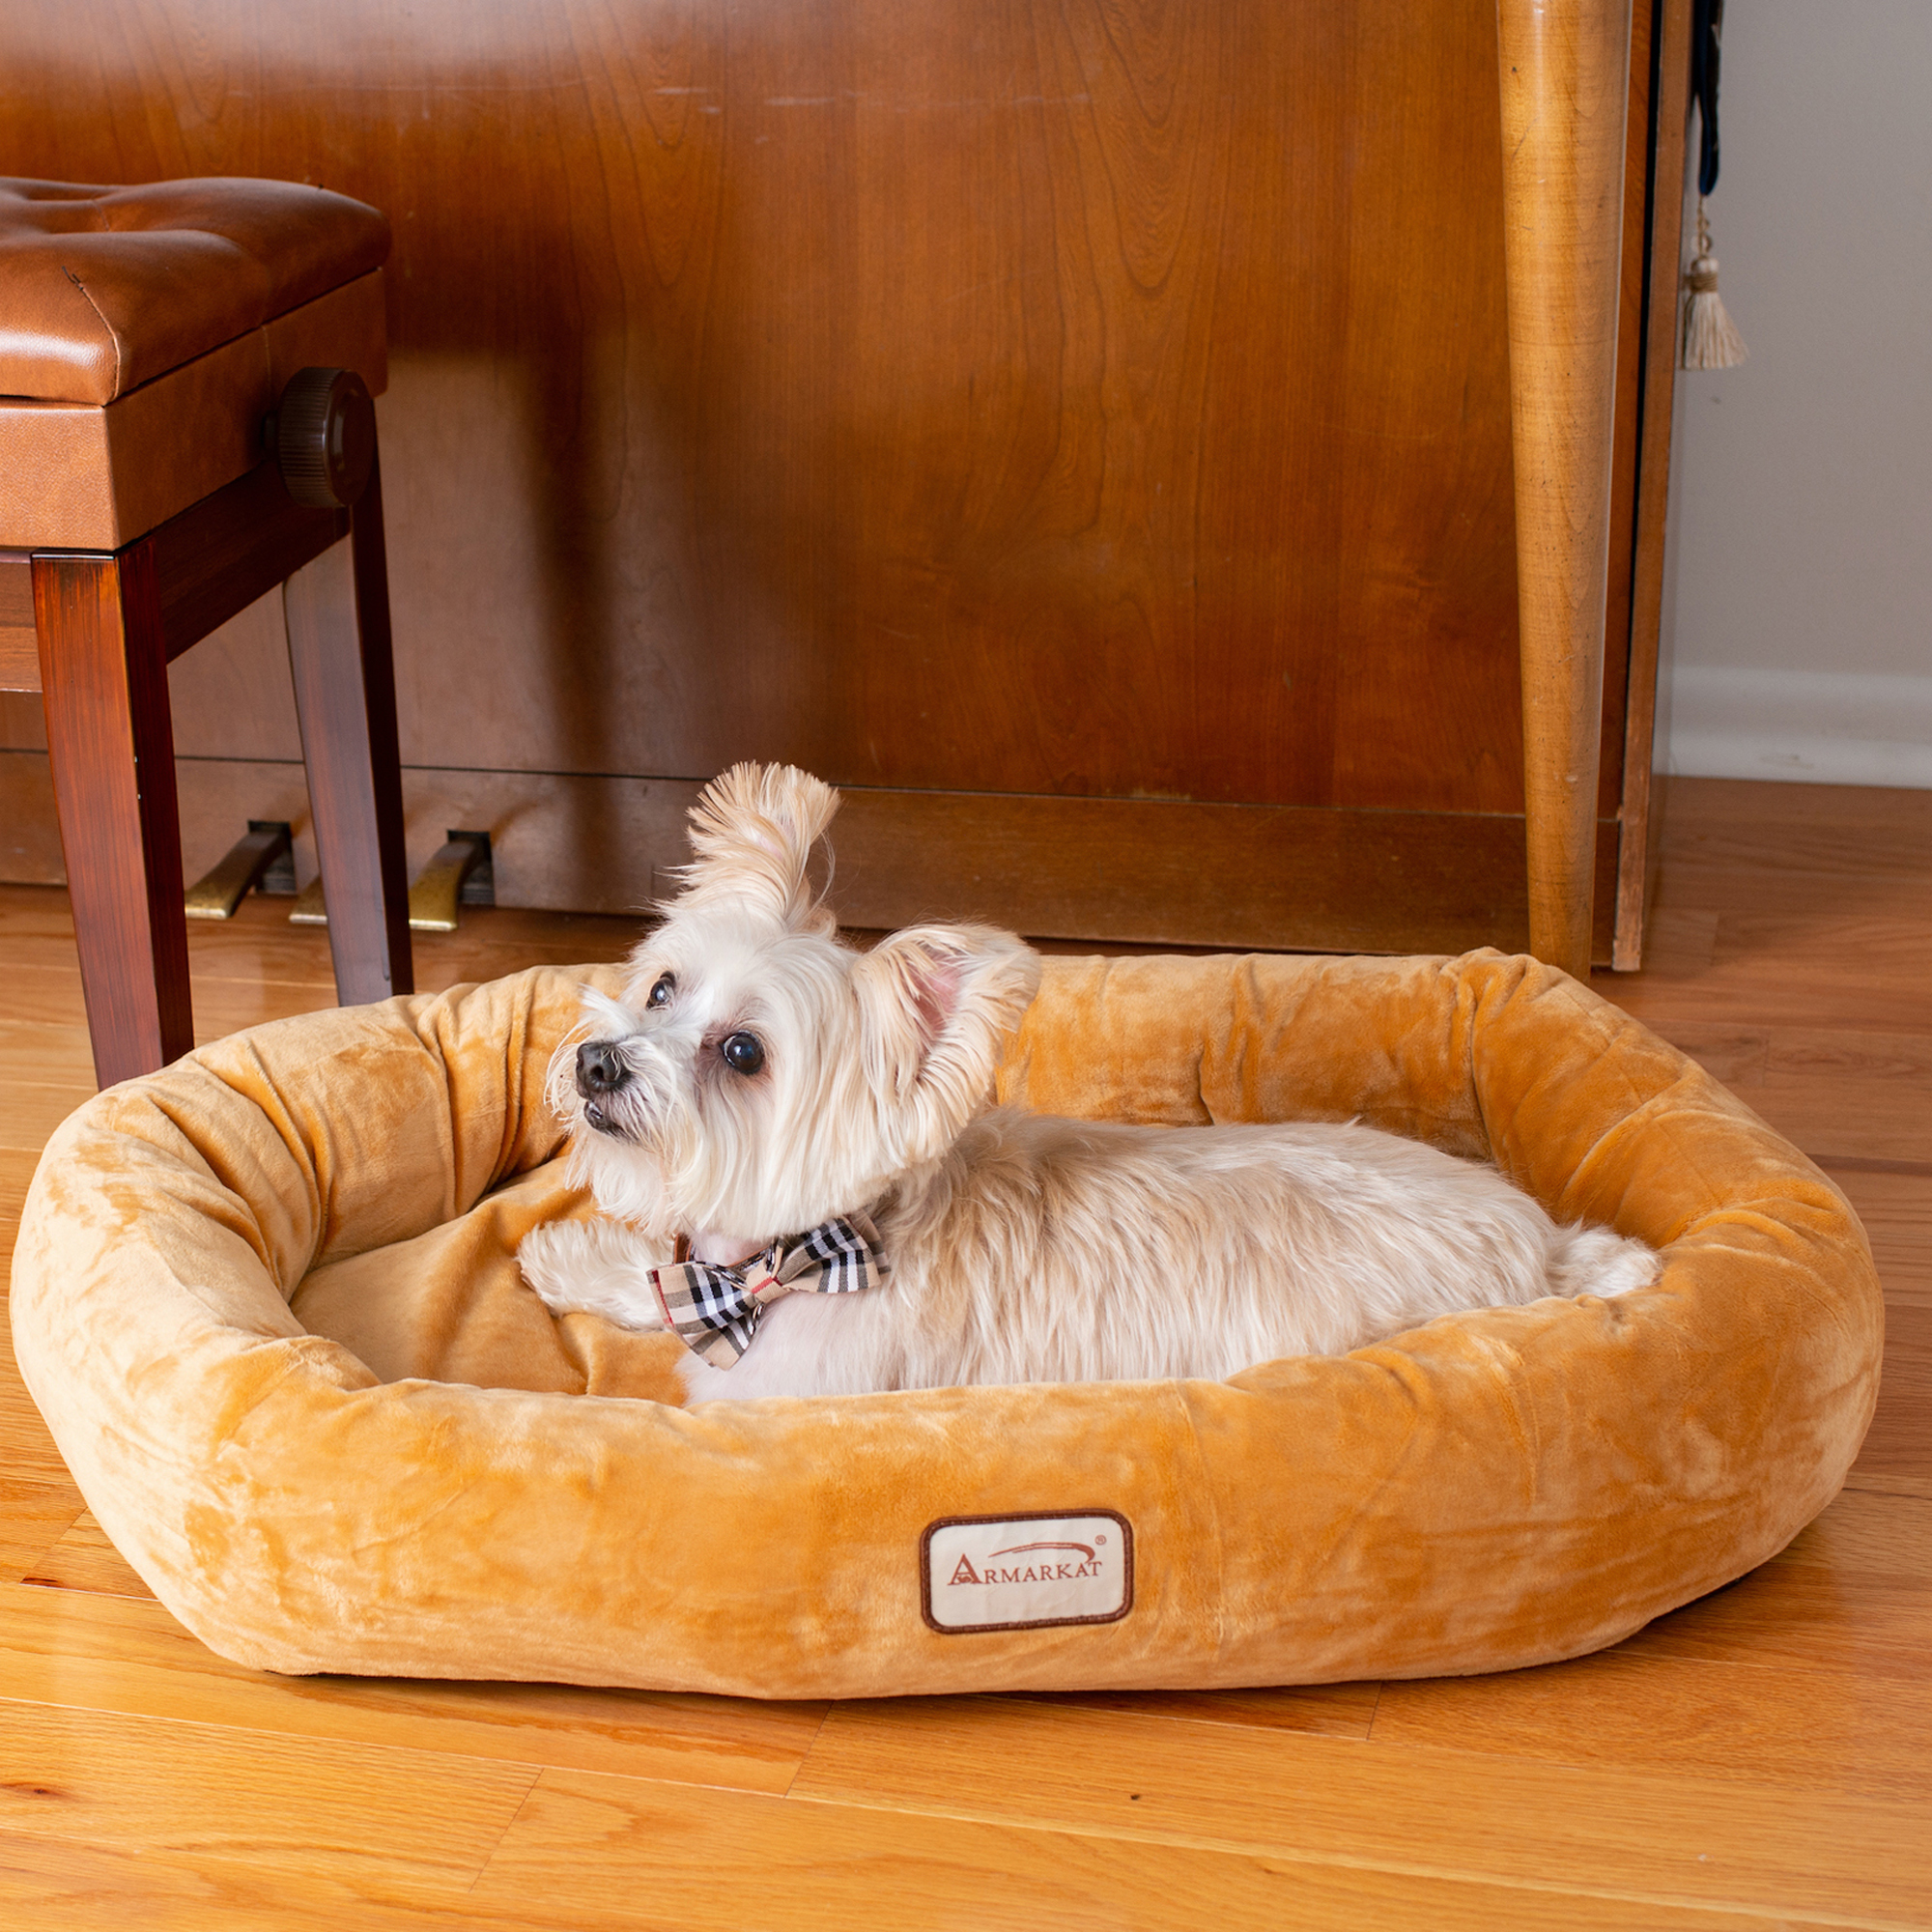 Picture of Aeromark D02CZS-S Armarkat Pet Bed 28 x 21 x 5 - Brown